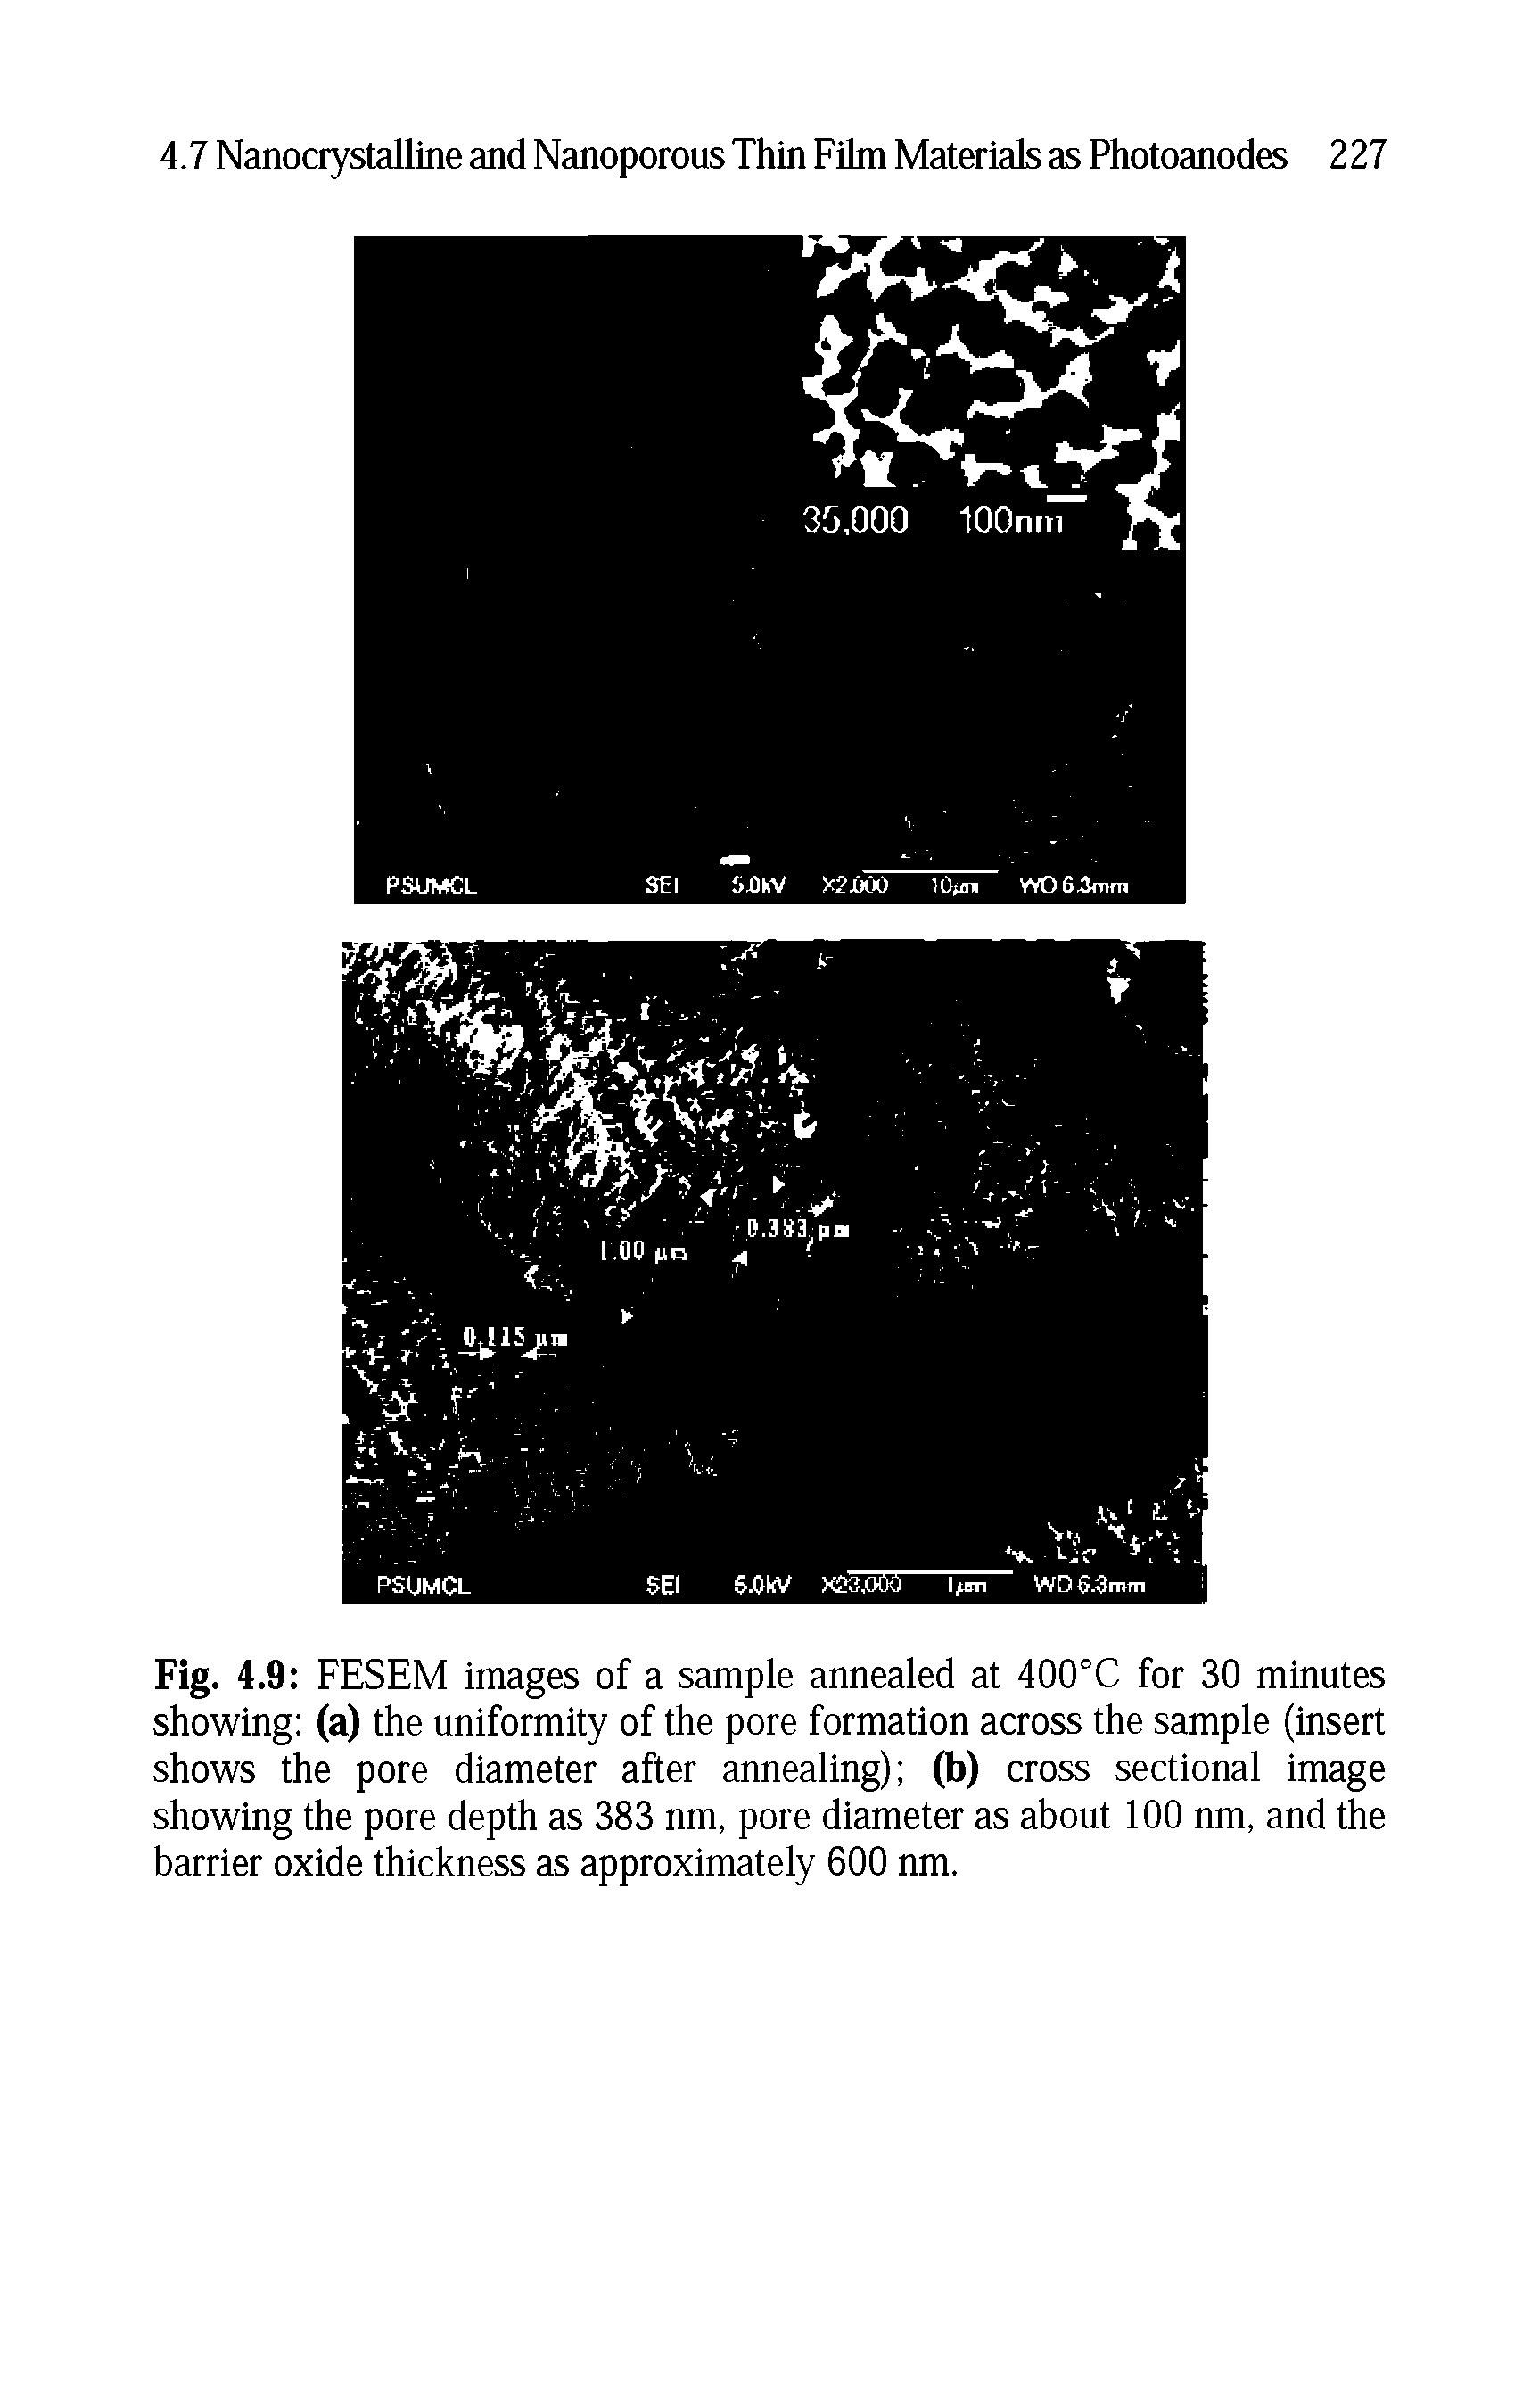 Fig. 4.9 FESEM images of a sample annealed at 400°C for 30 minutes showing (a) the uniformity of the pore formation across the sample (insert shows the pore diameter after annealing) (b) cross sectional image showing the pore depth as 383 nm, pore diameter as about 100 nm, and the barrier oxide thickness as approximately 600 nm.